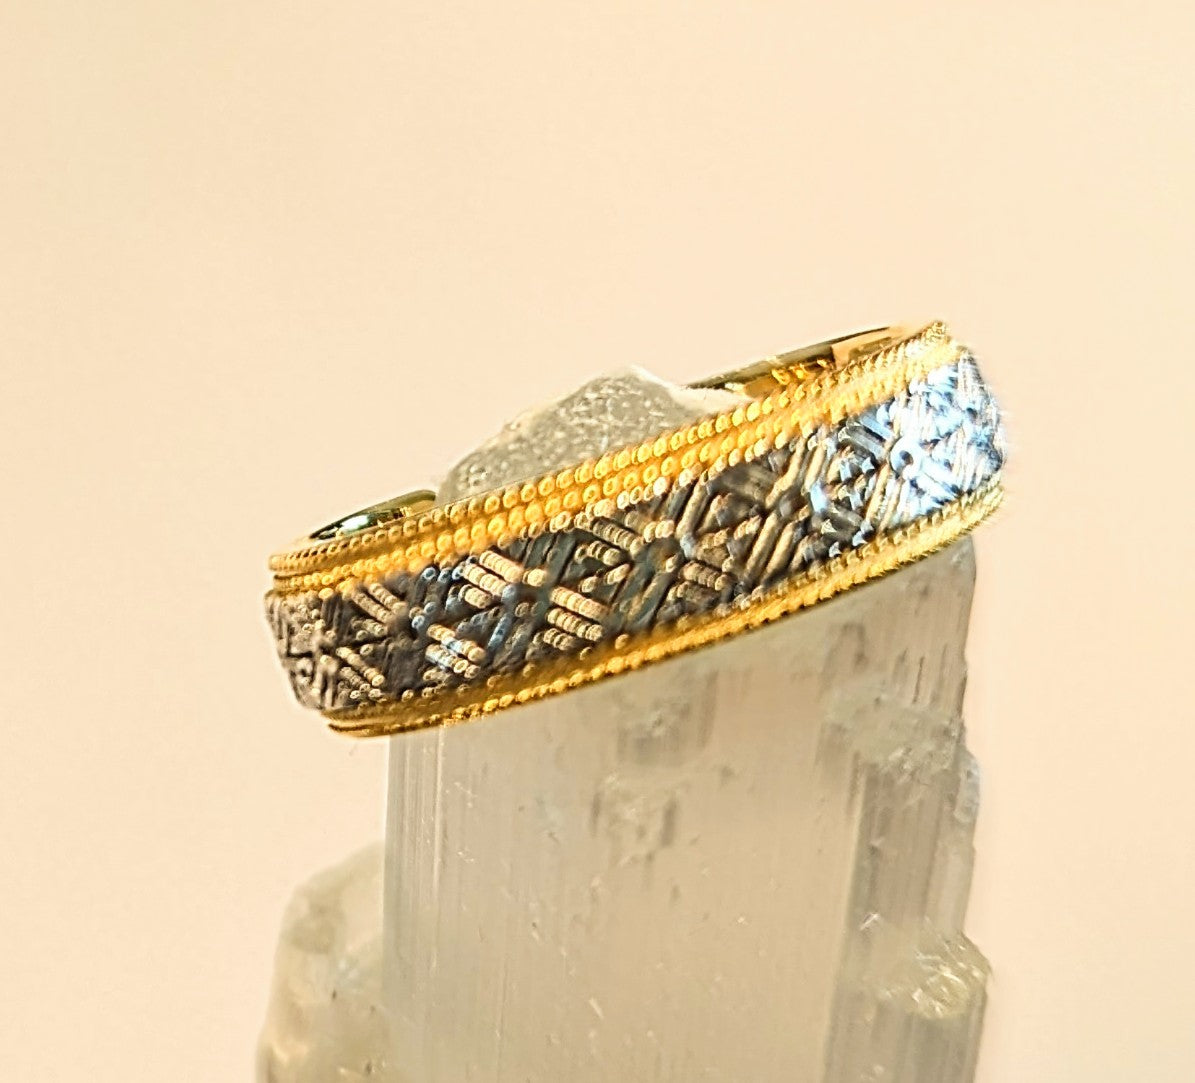 Adjustable sterling silver ring with gold plate and oxidized details